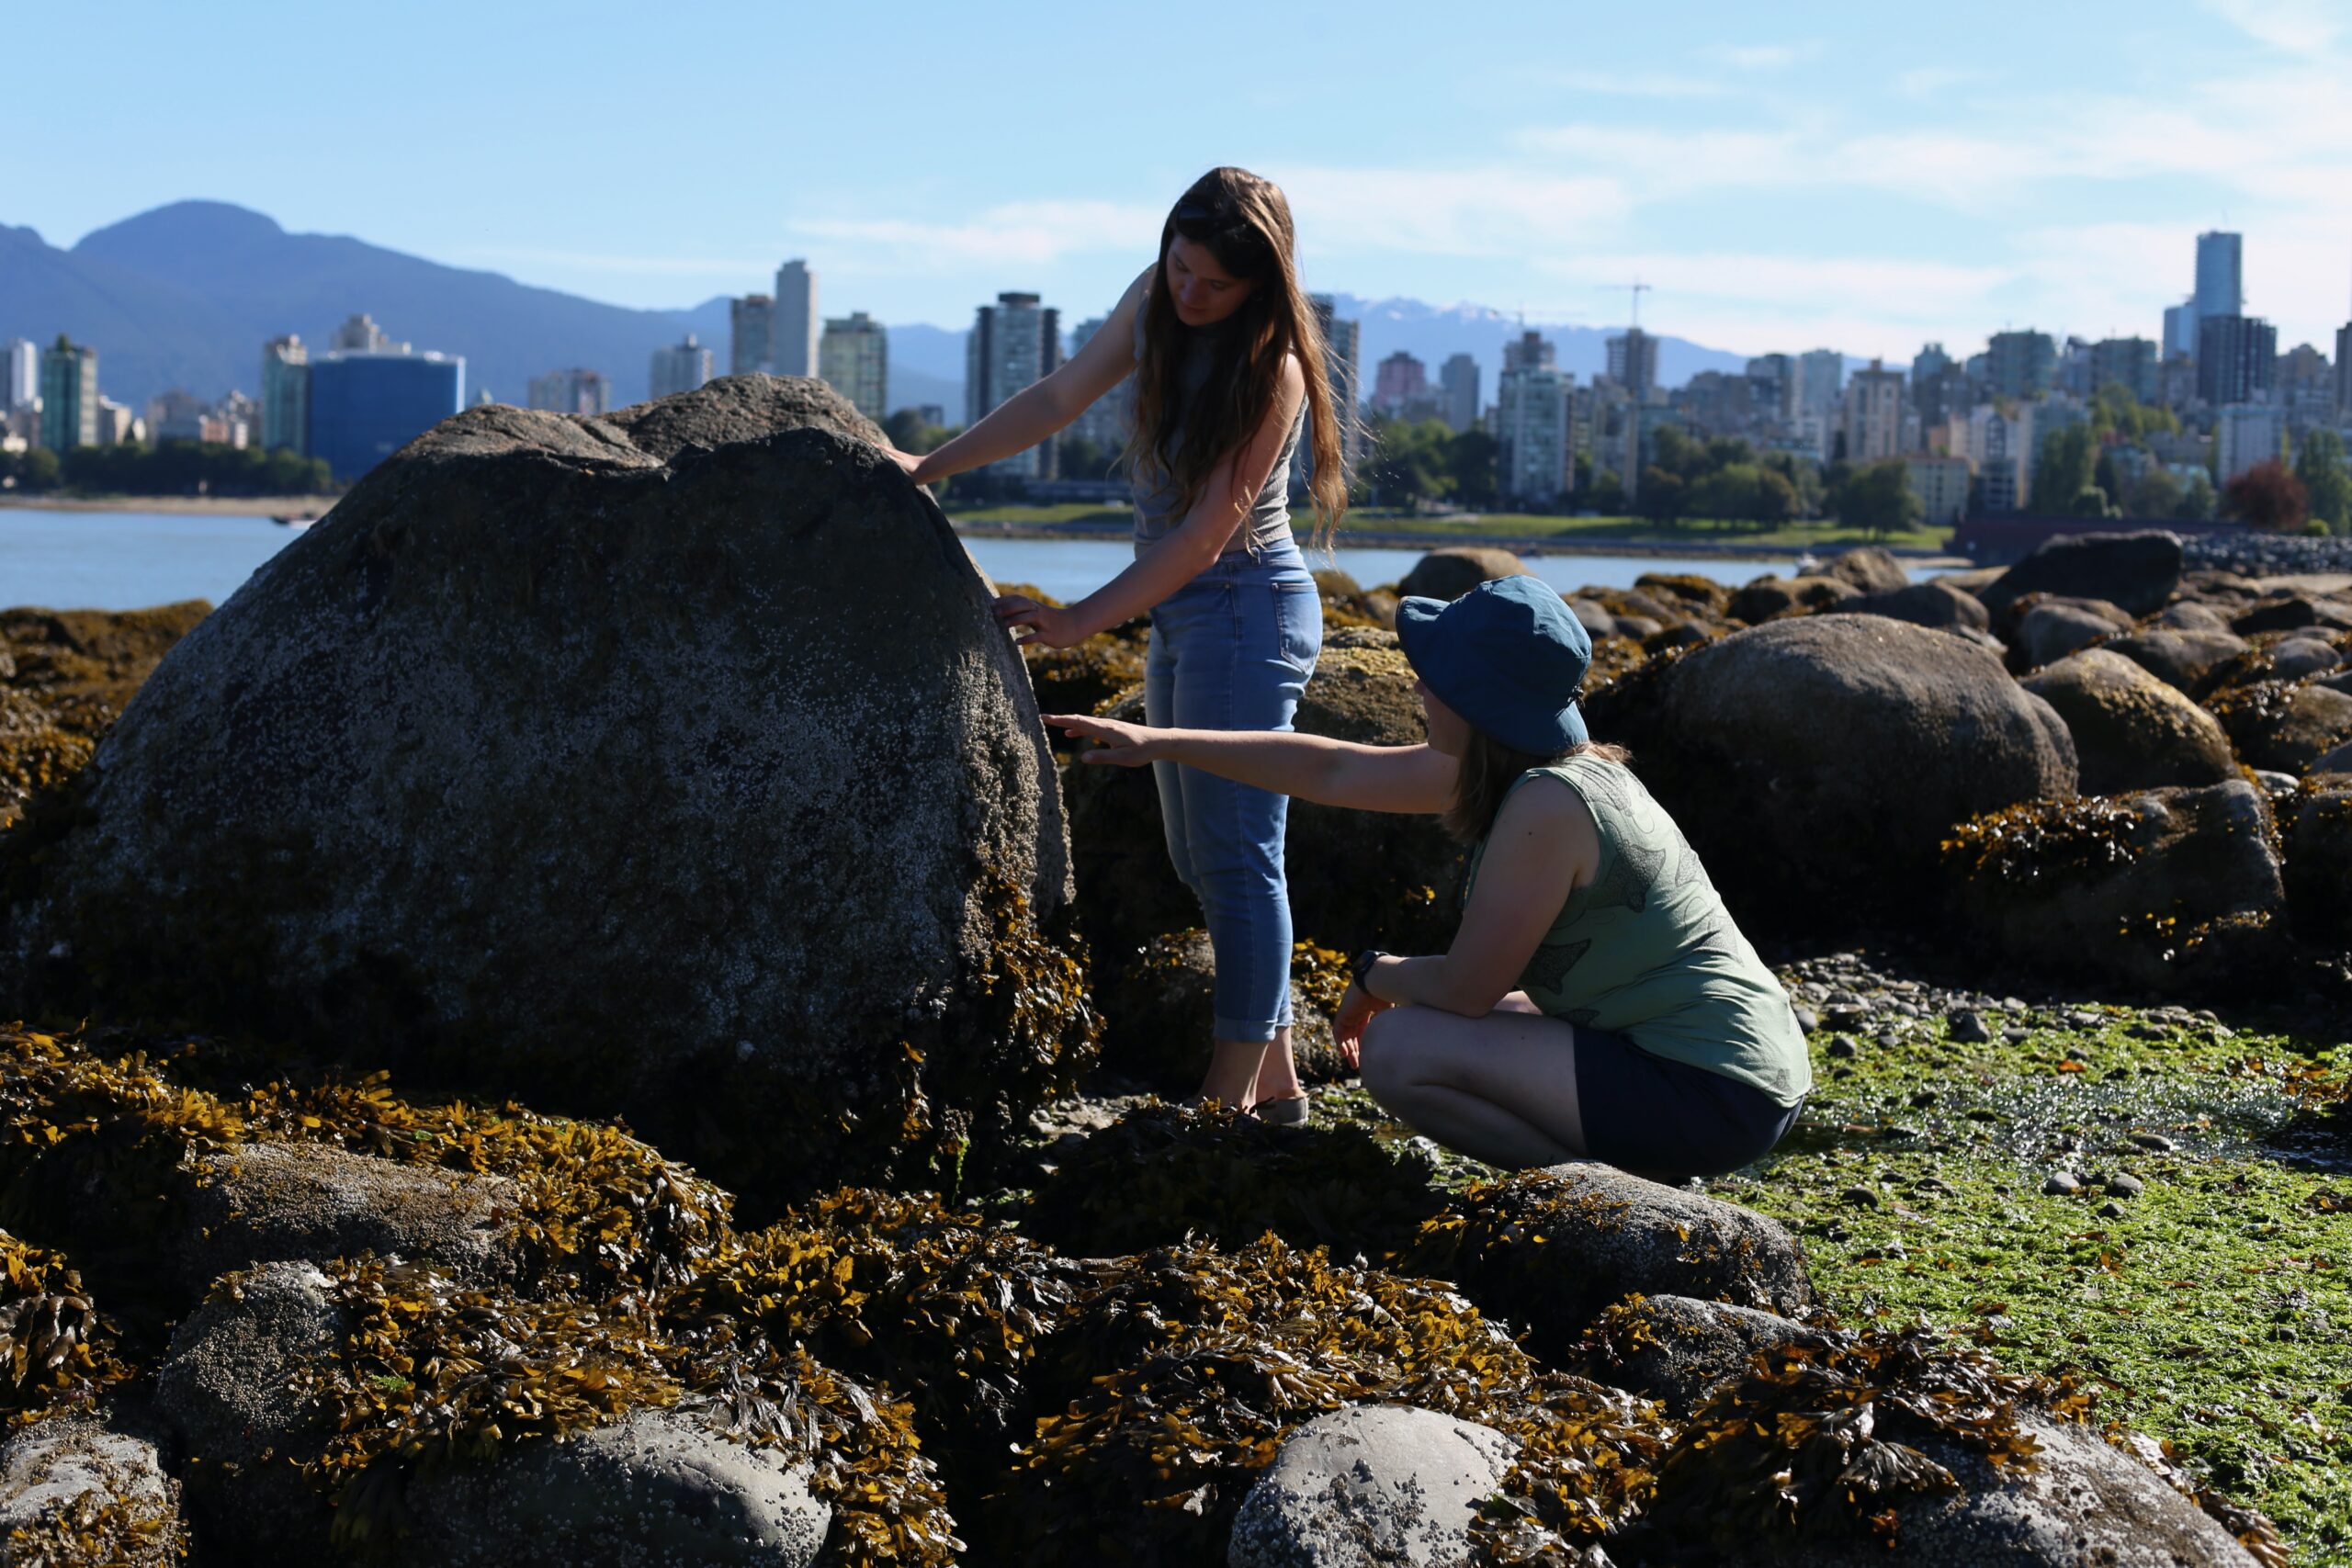 Rebecca Hansen, standing, and Amelia Hesketh, both researchers in Harley's lab at the University of British Columbia, examine marine life on a boulder at Kitsilano Beach during low tide.